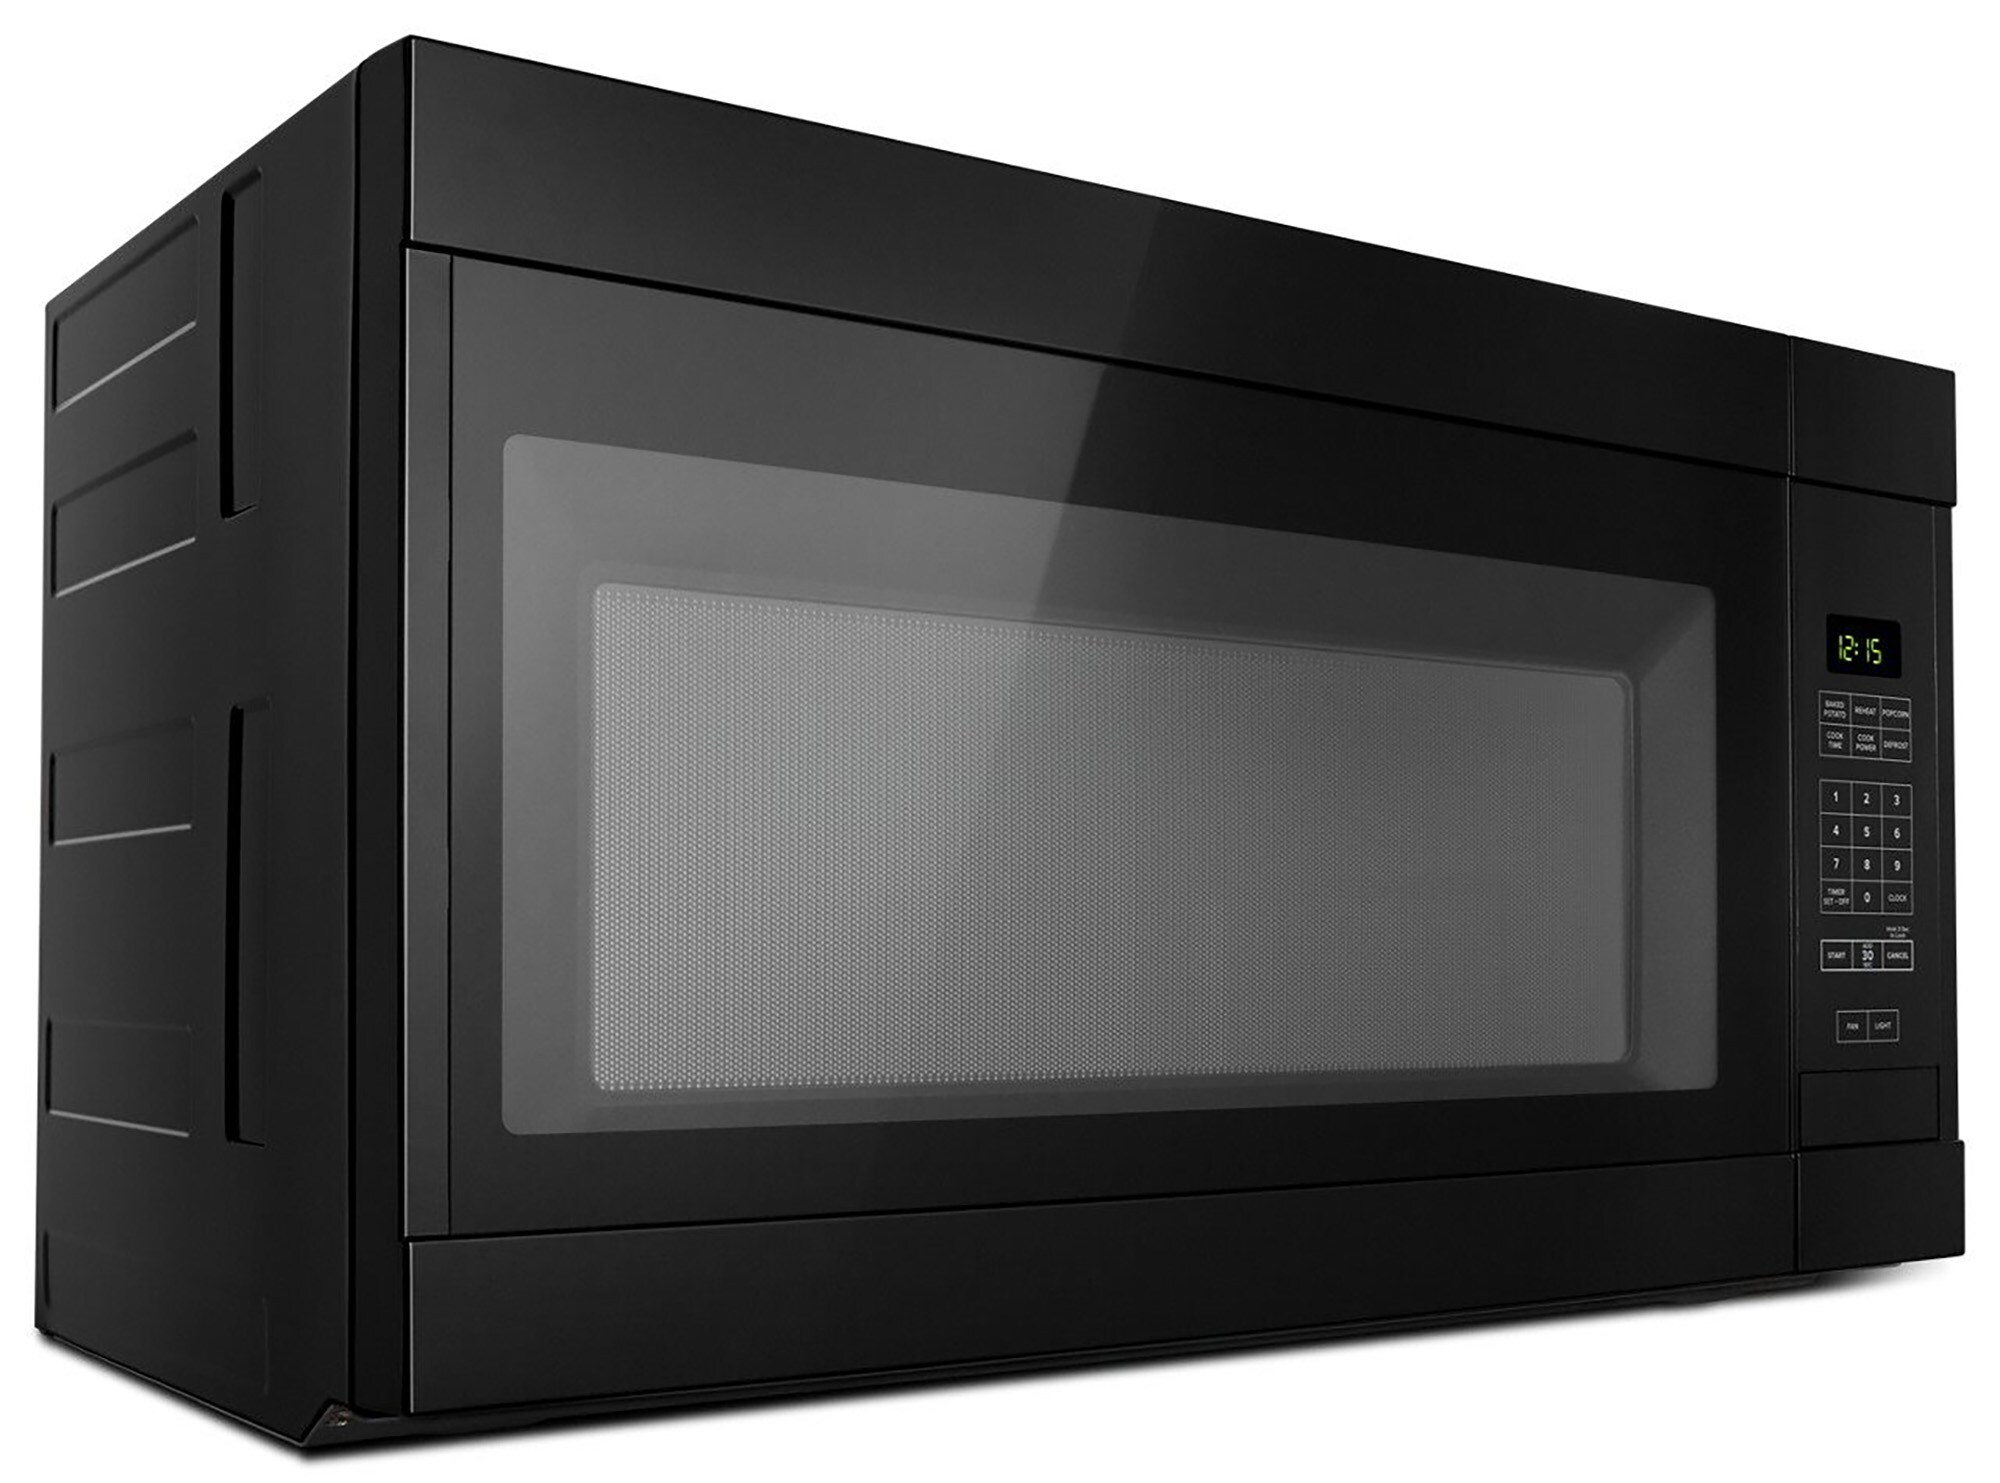 AMV2307PFS by Amana - 1.6 Cu. Ft. Over-the-Range Microwave with Add 0:30  Seconds